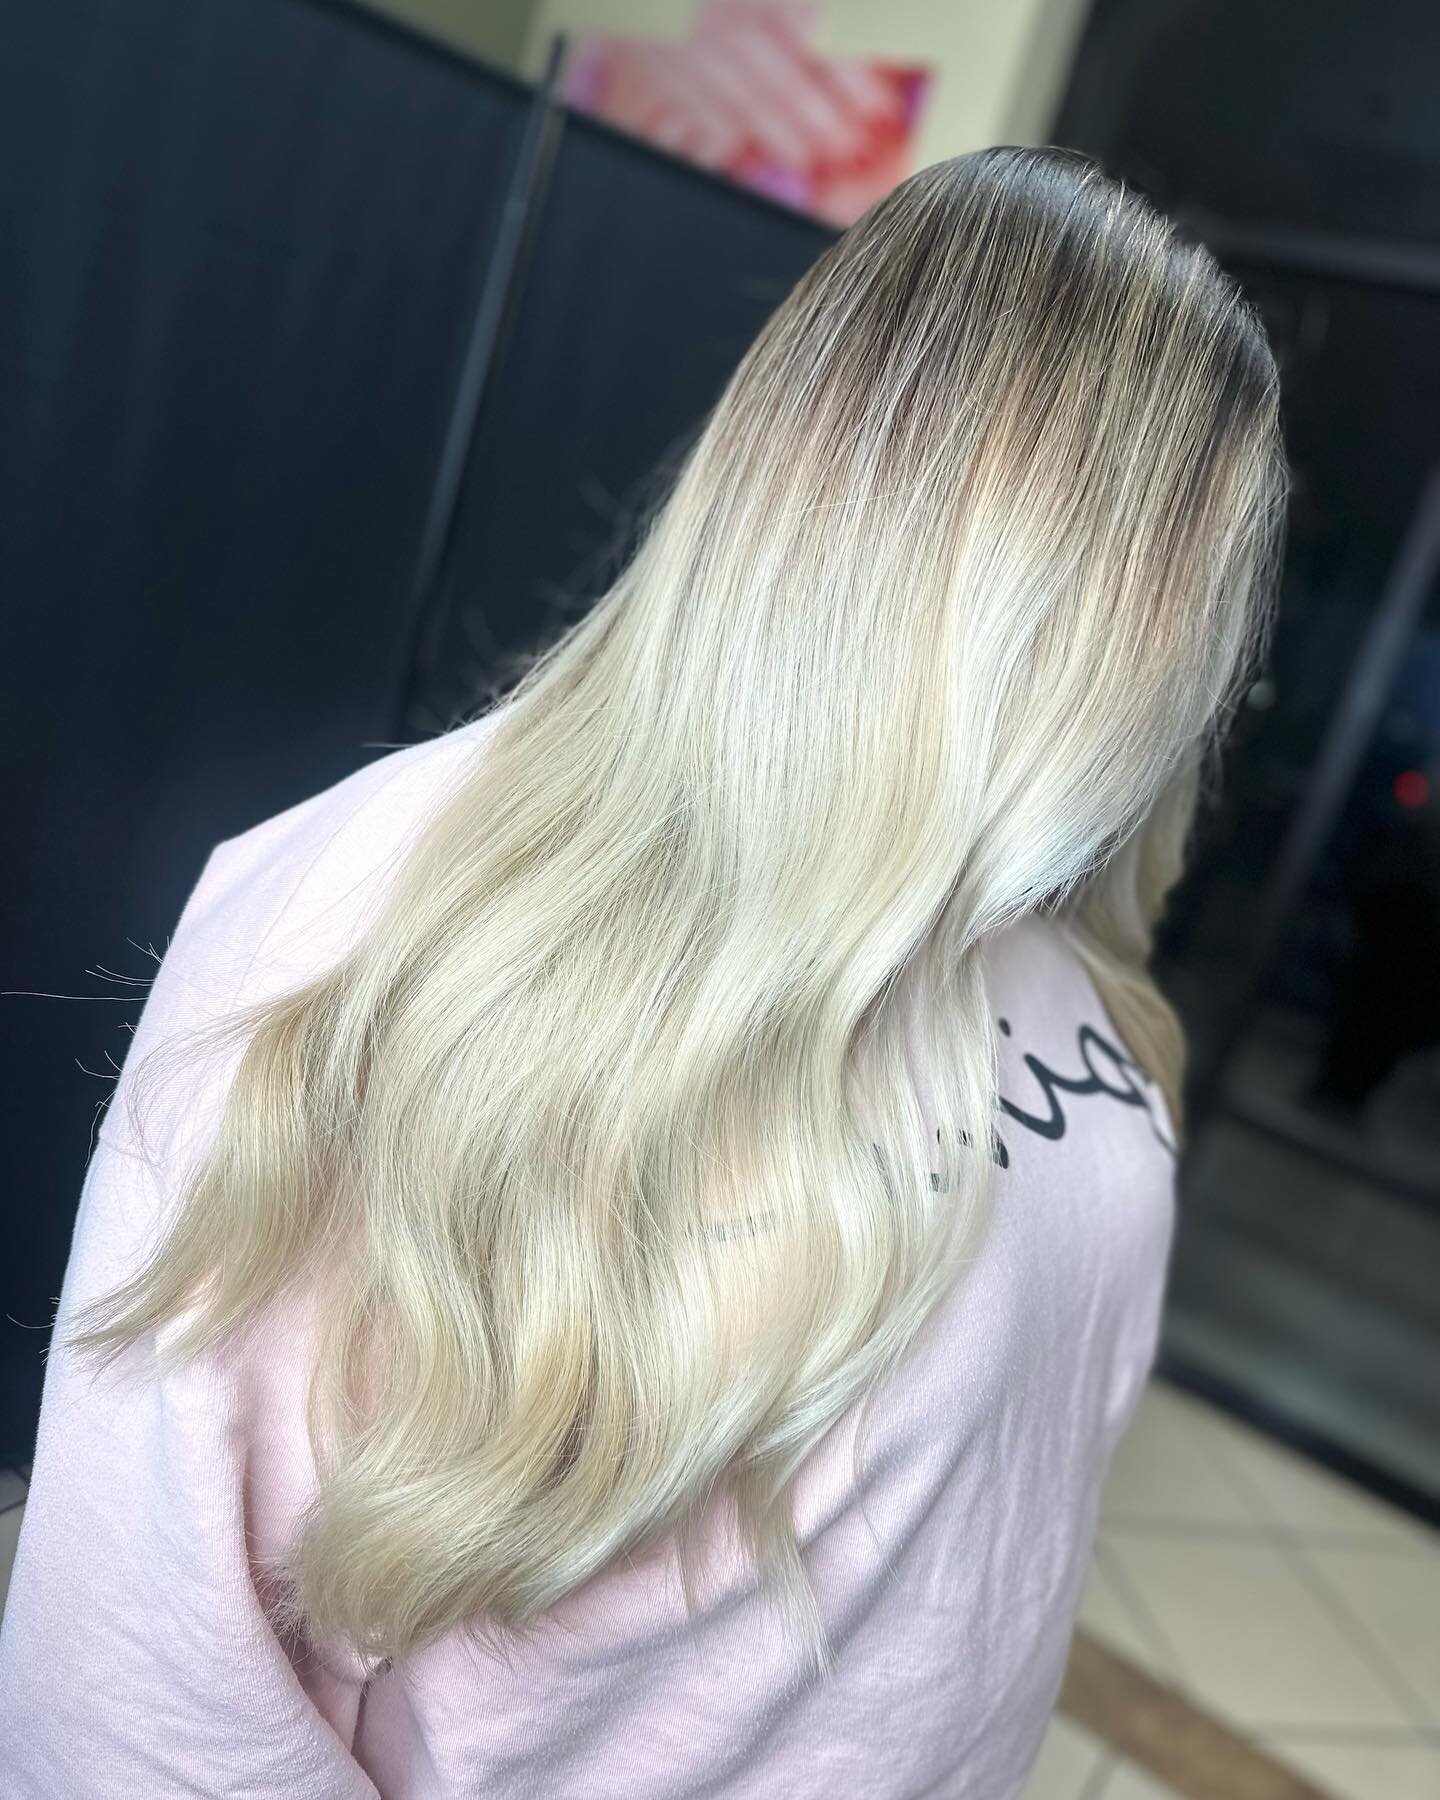 When your client trusts the 10-hour process 💕 This is only her second session &amp; we&rsquo;ve reached her dream hair! 
&bull;

&bull;

&bull;
#blondehairtransformation #blondetransformation #creamyblondehair #creamyblondes #secondsession #softwave